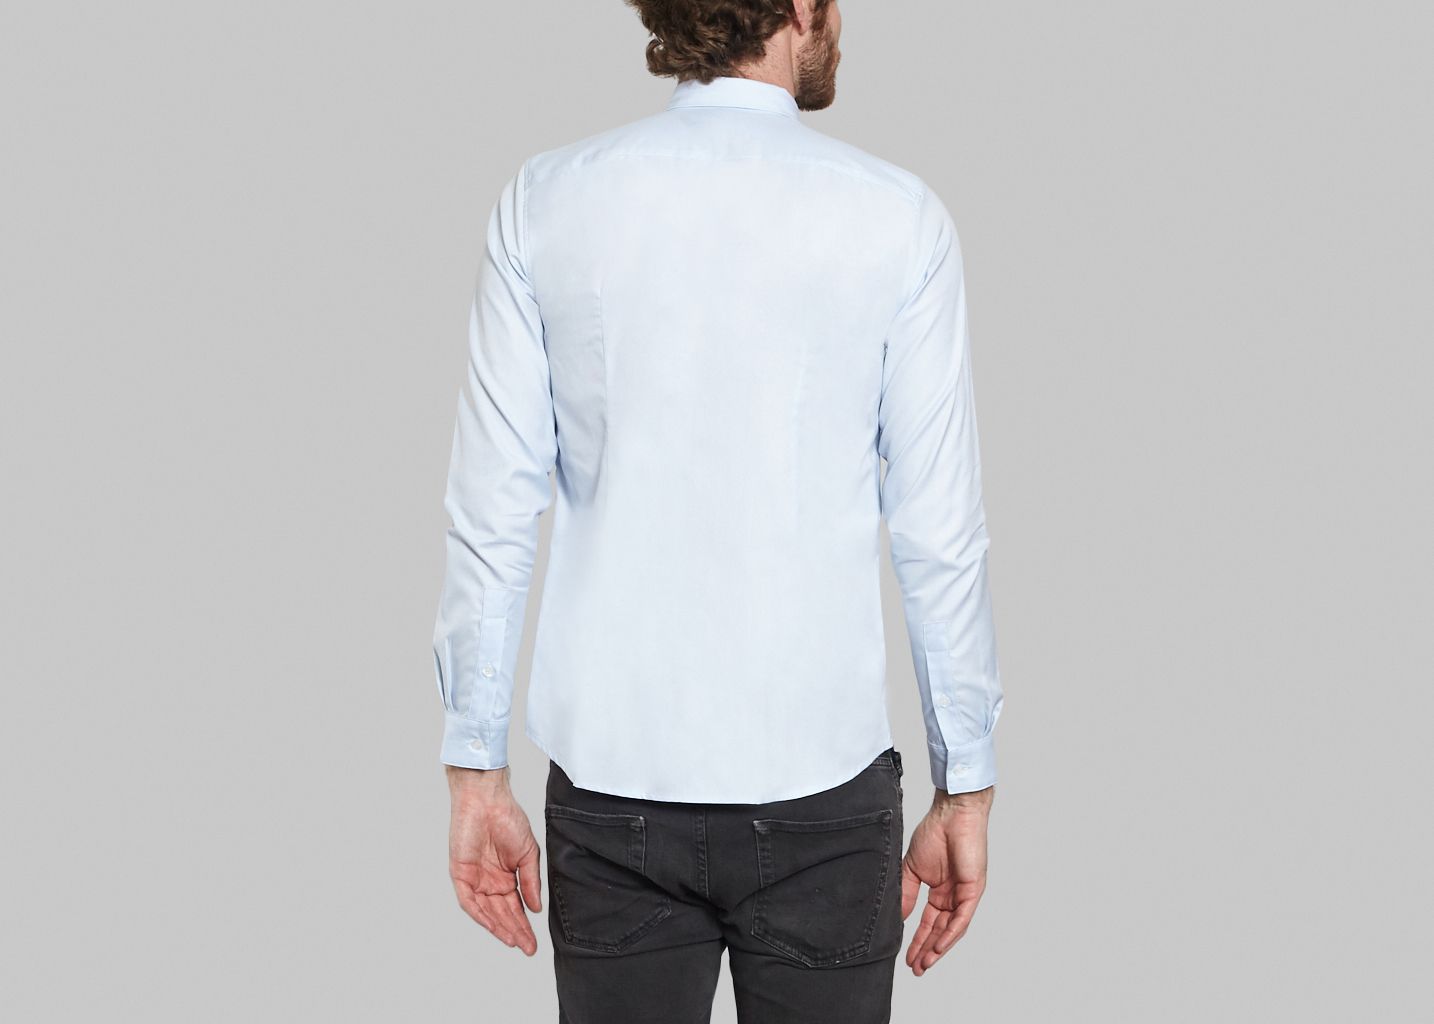 Magnetism Shirt - The Faraday Project